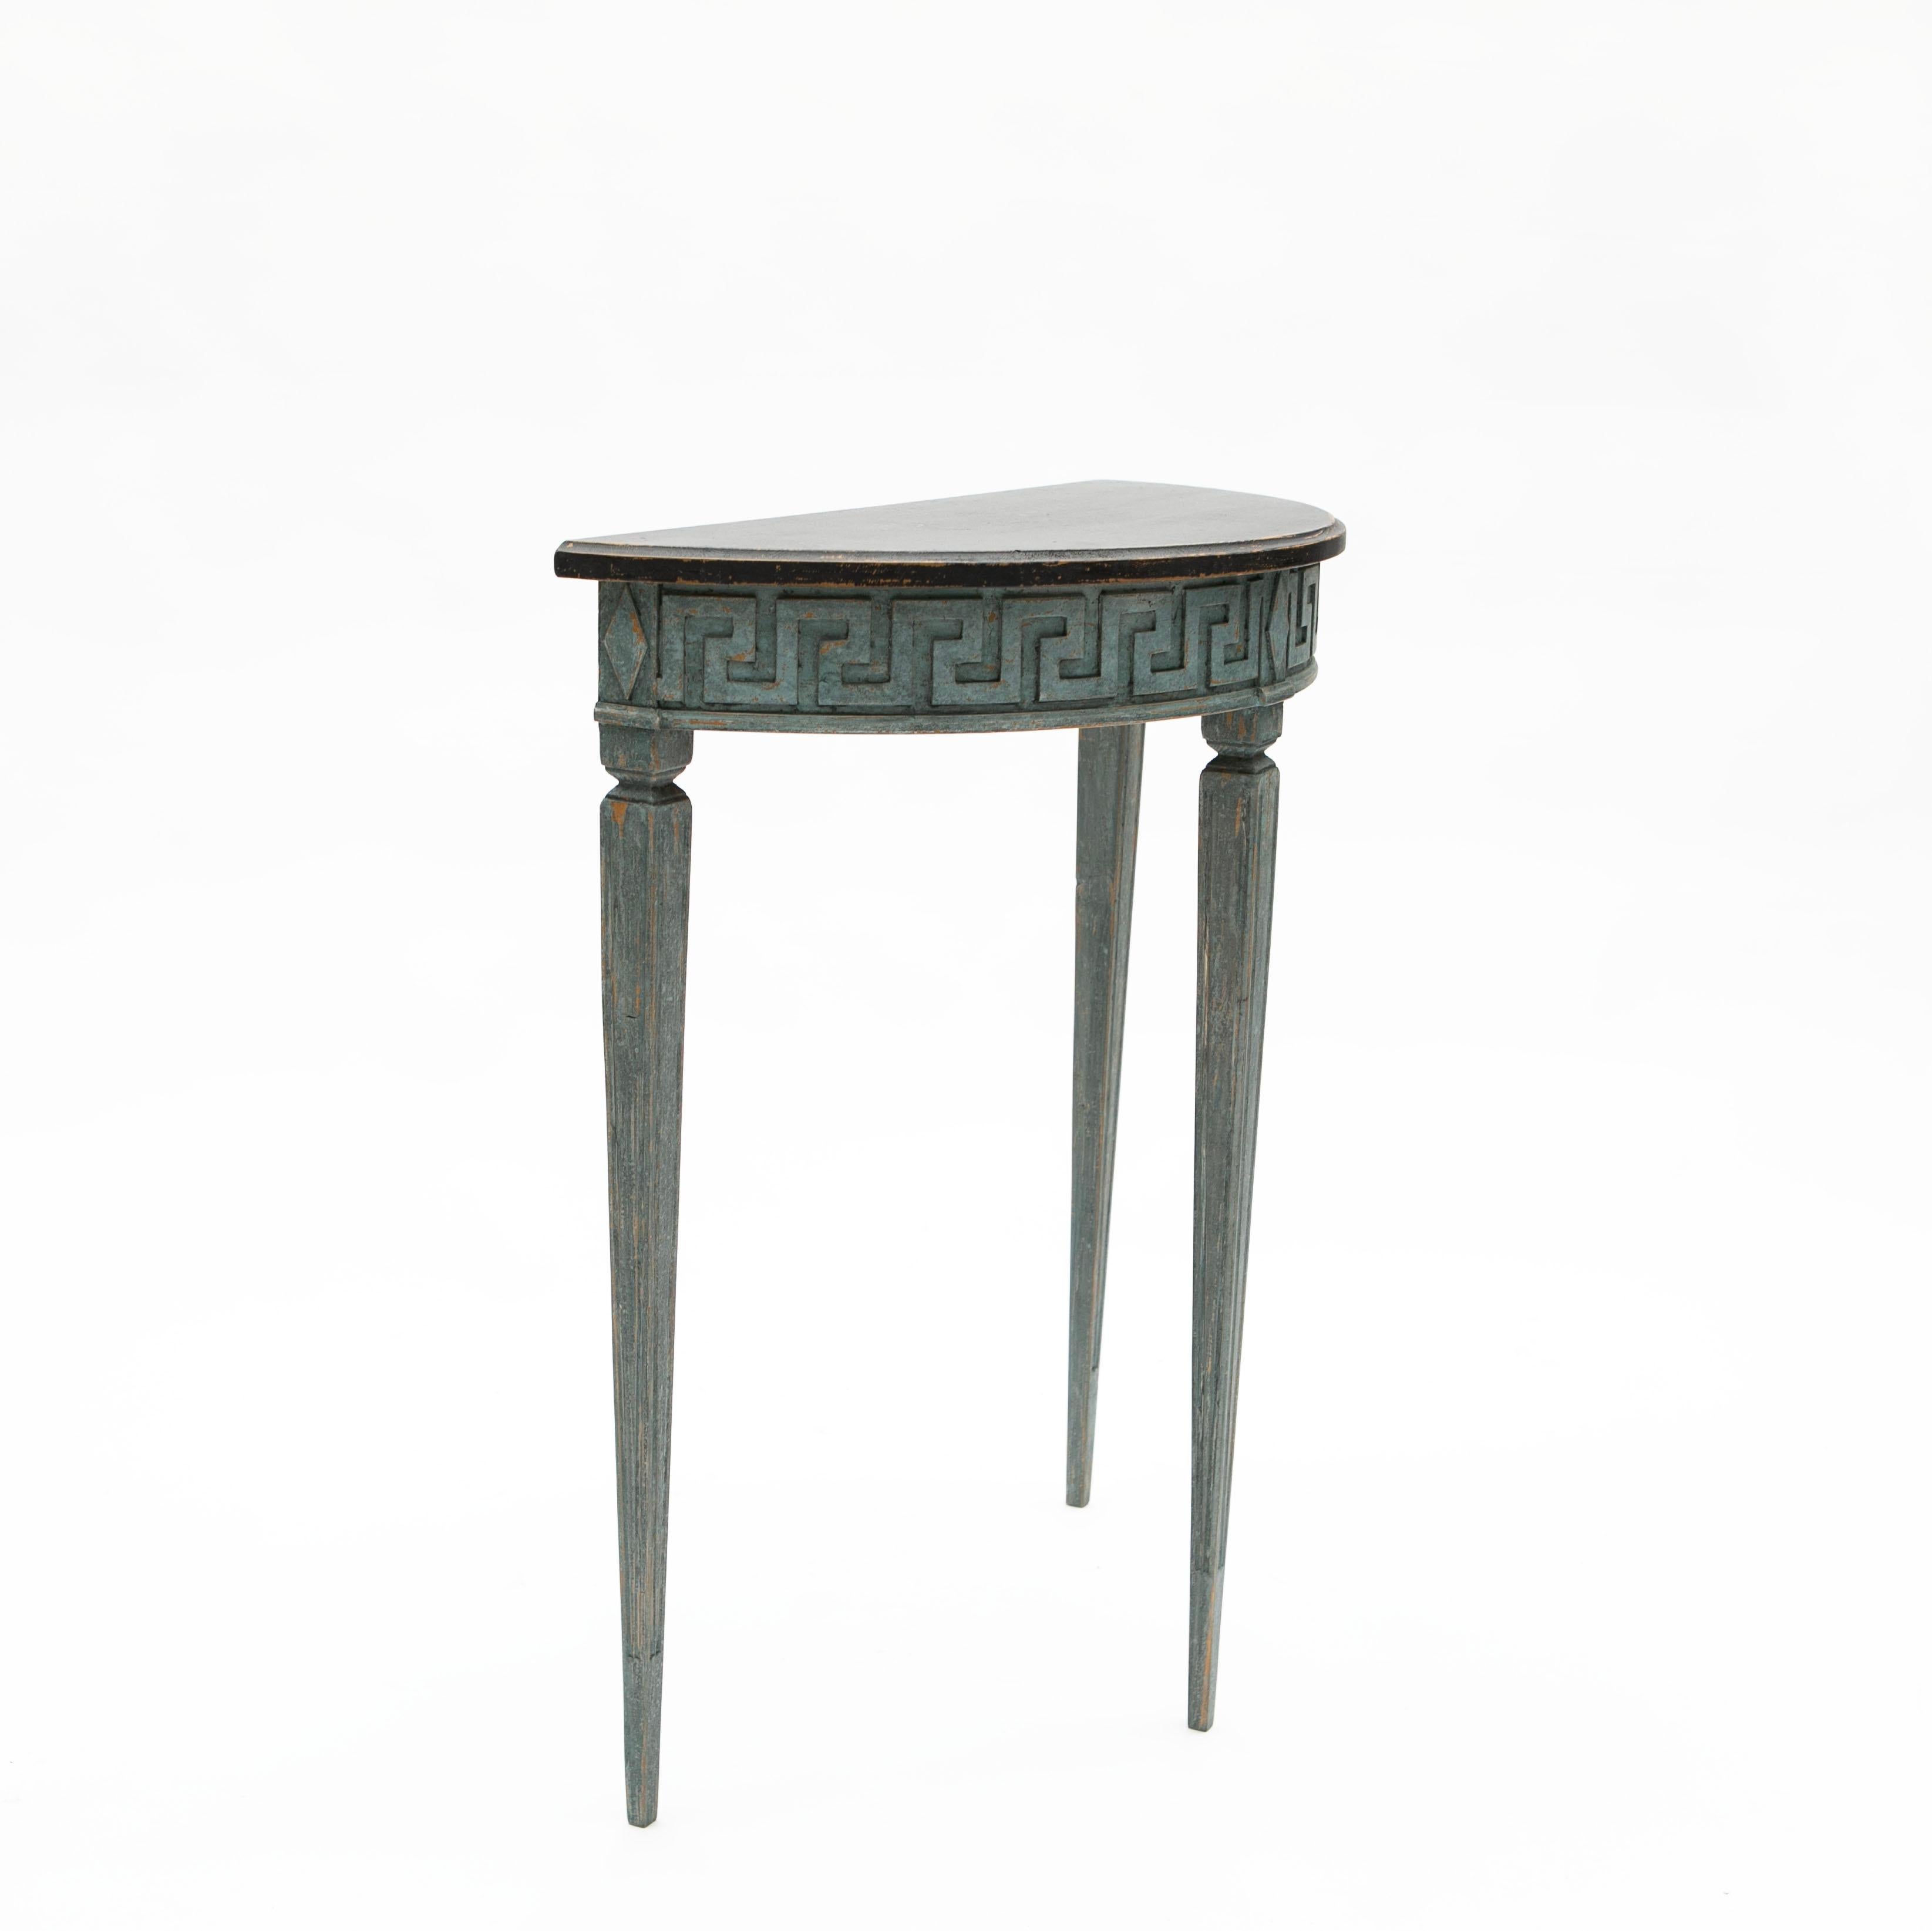 20th Century Pair of Gustavian-Style Demilune Console Tables, Sweden c. 1900